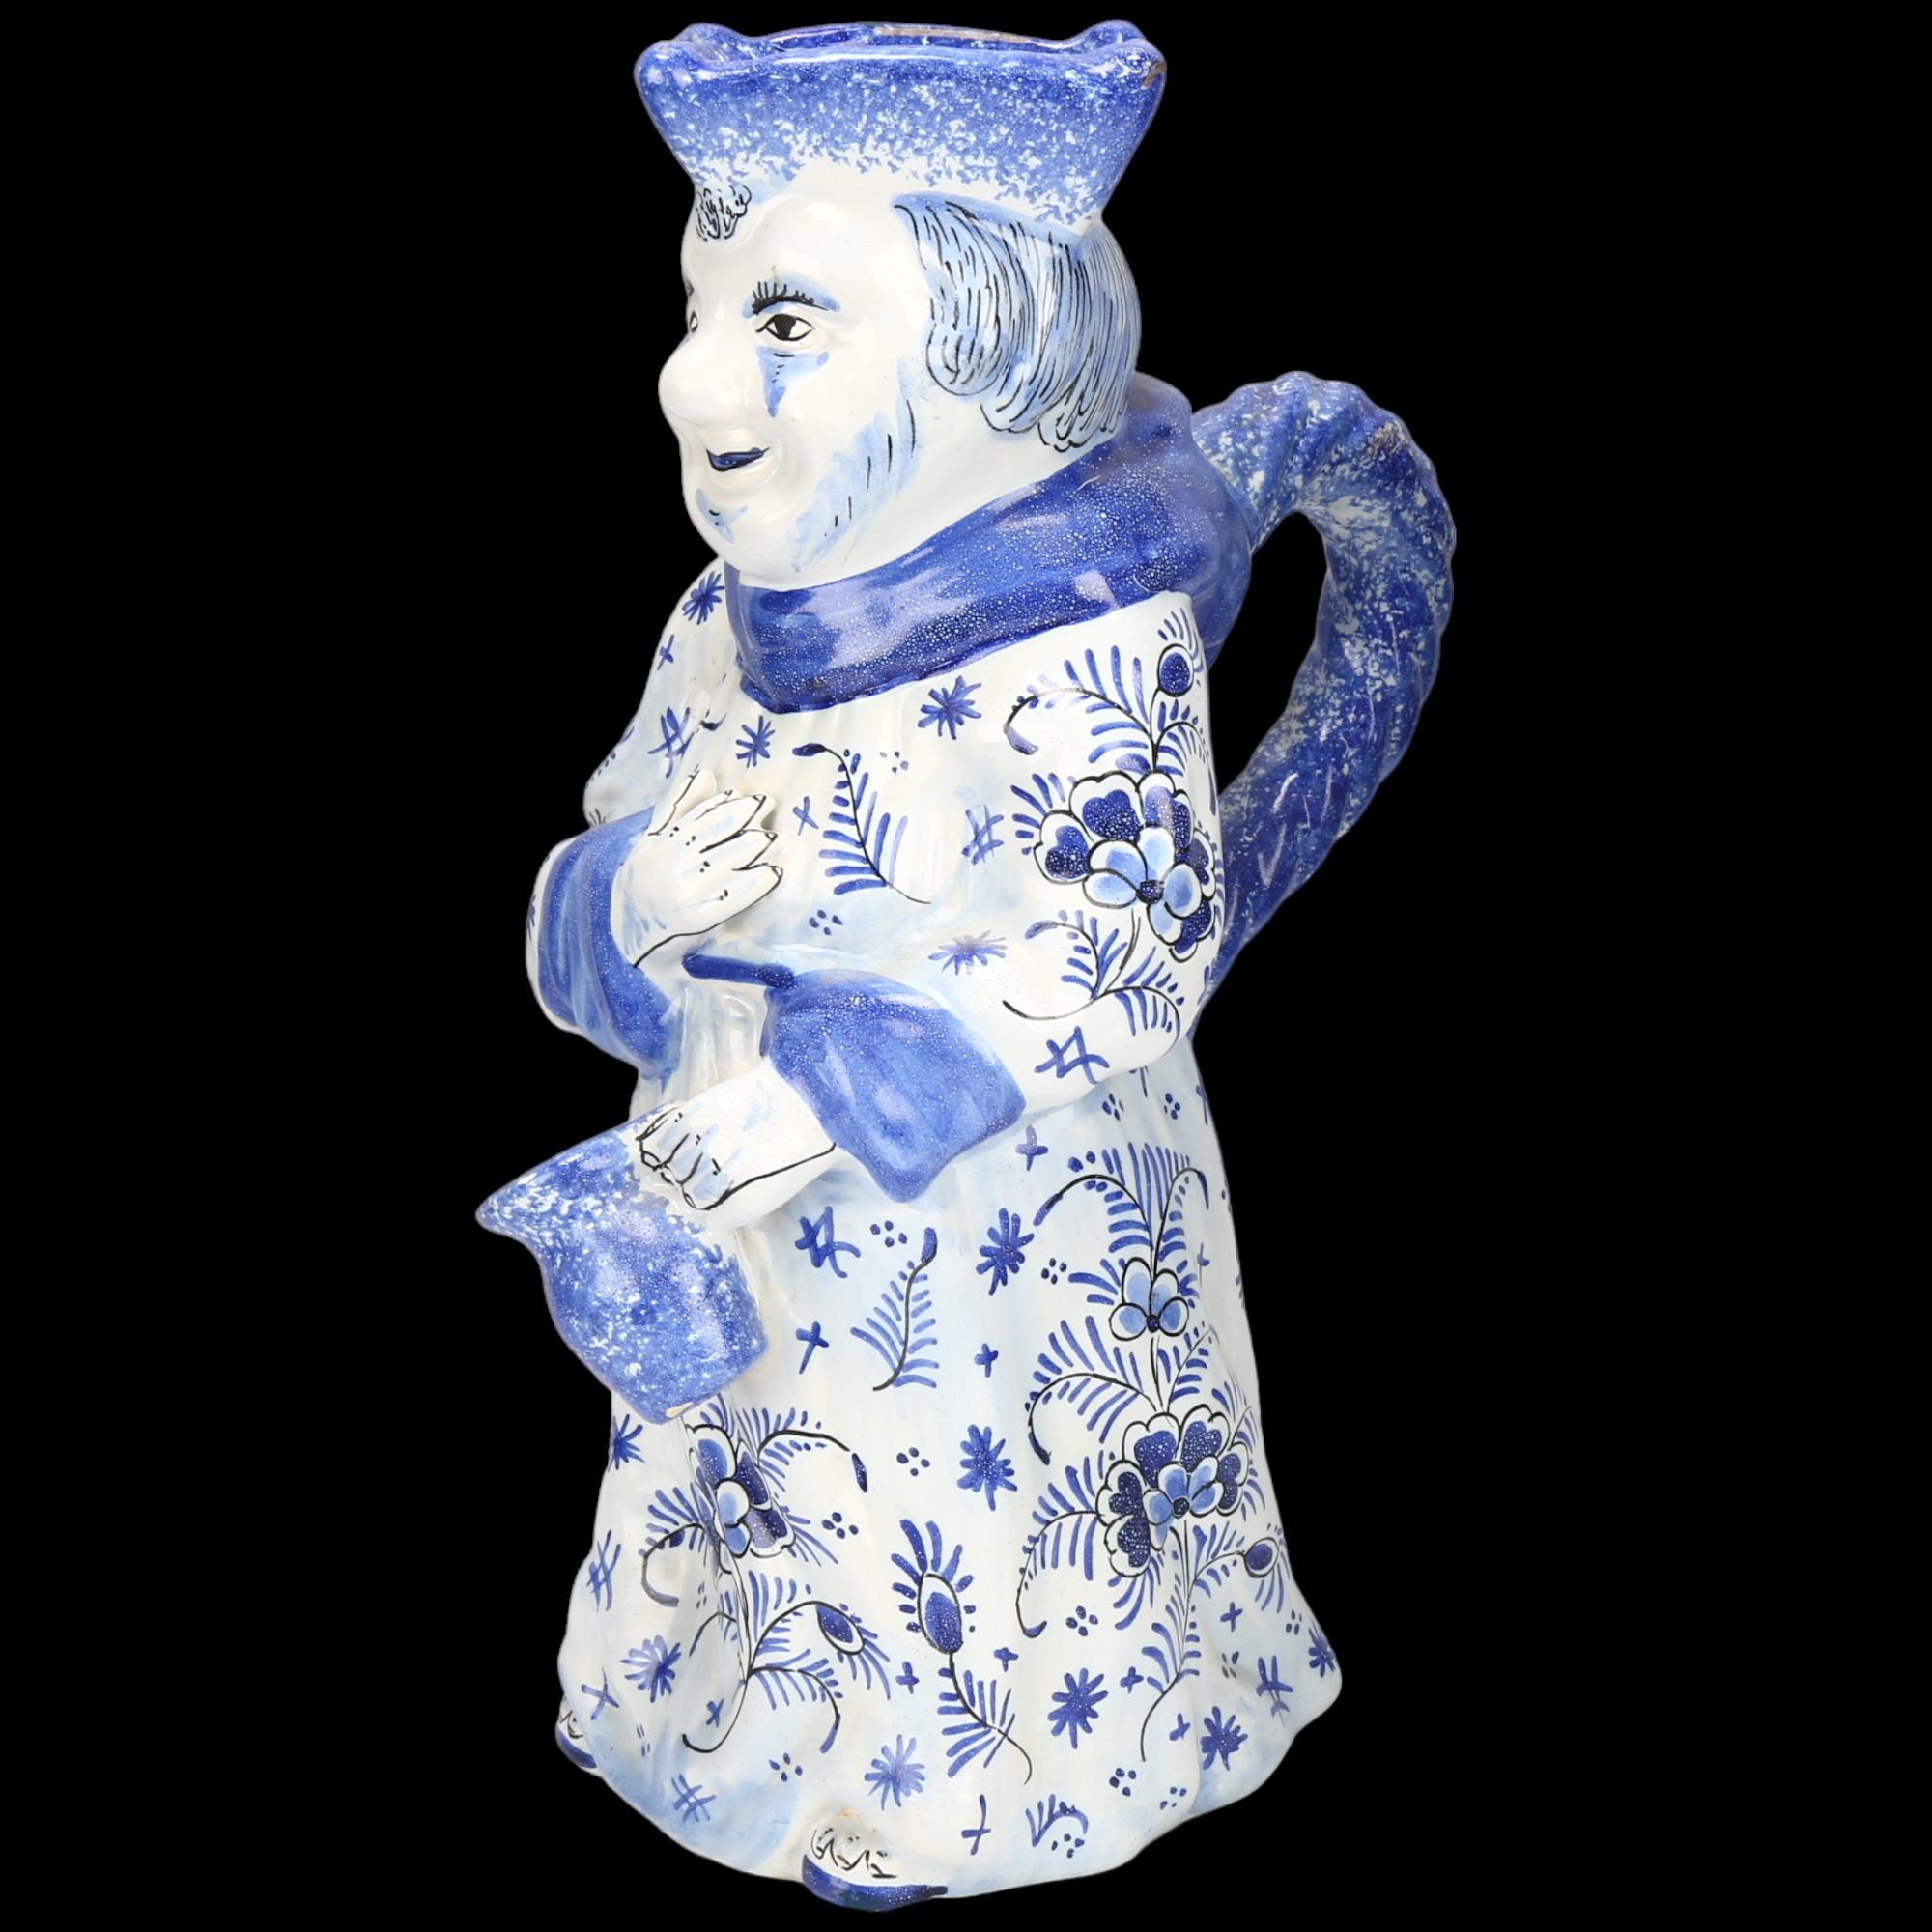 Delft blue and white pottery Toby jug, height 28.5cm 1 tiny glaze chip on the side of the hat,